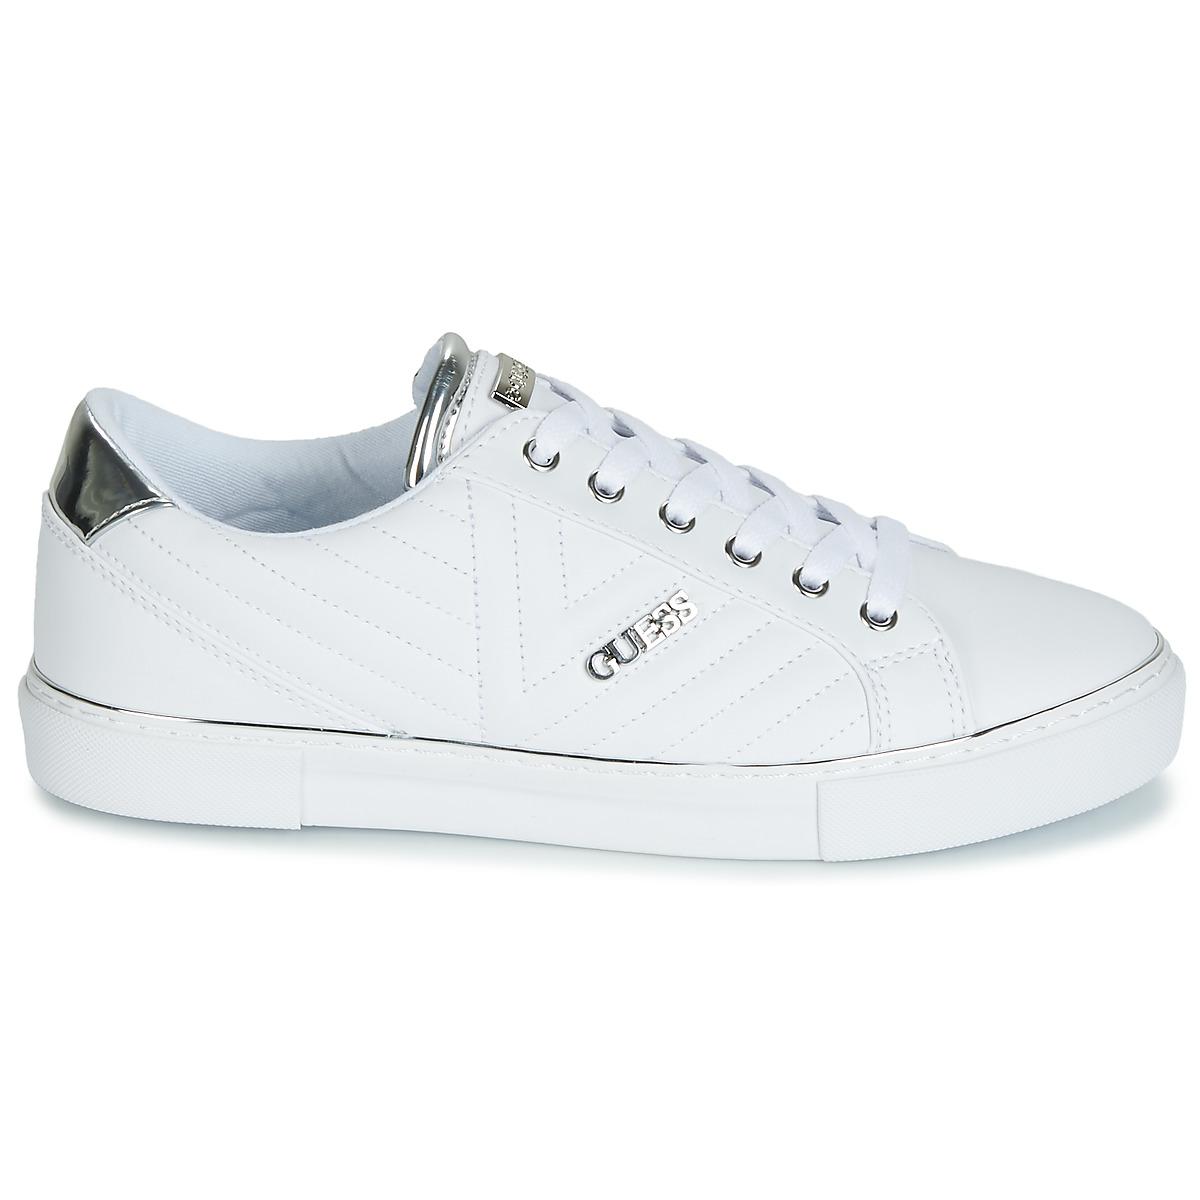 Guess Groovie Shoes (trainers) in White 